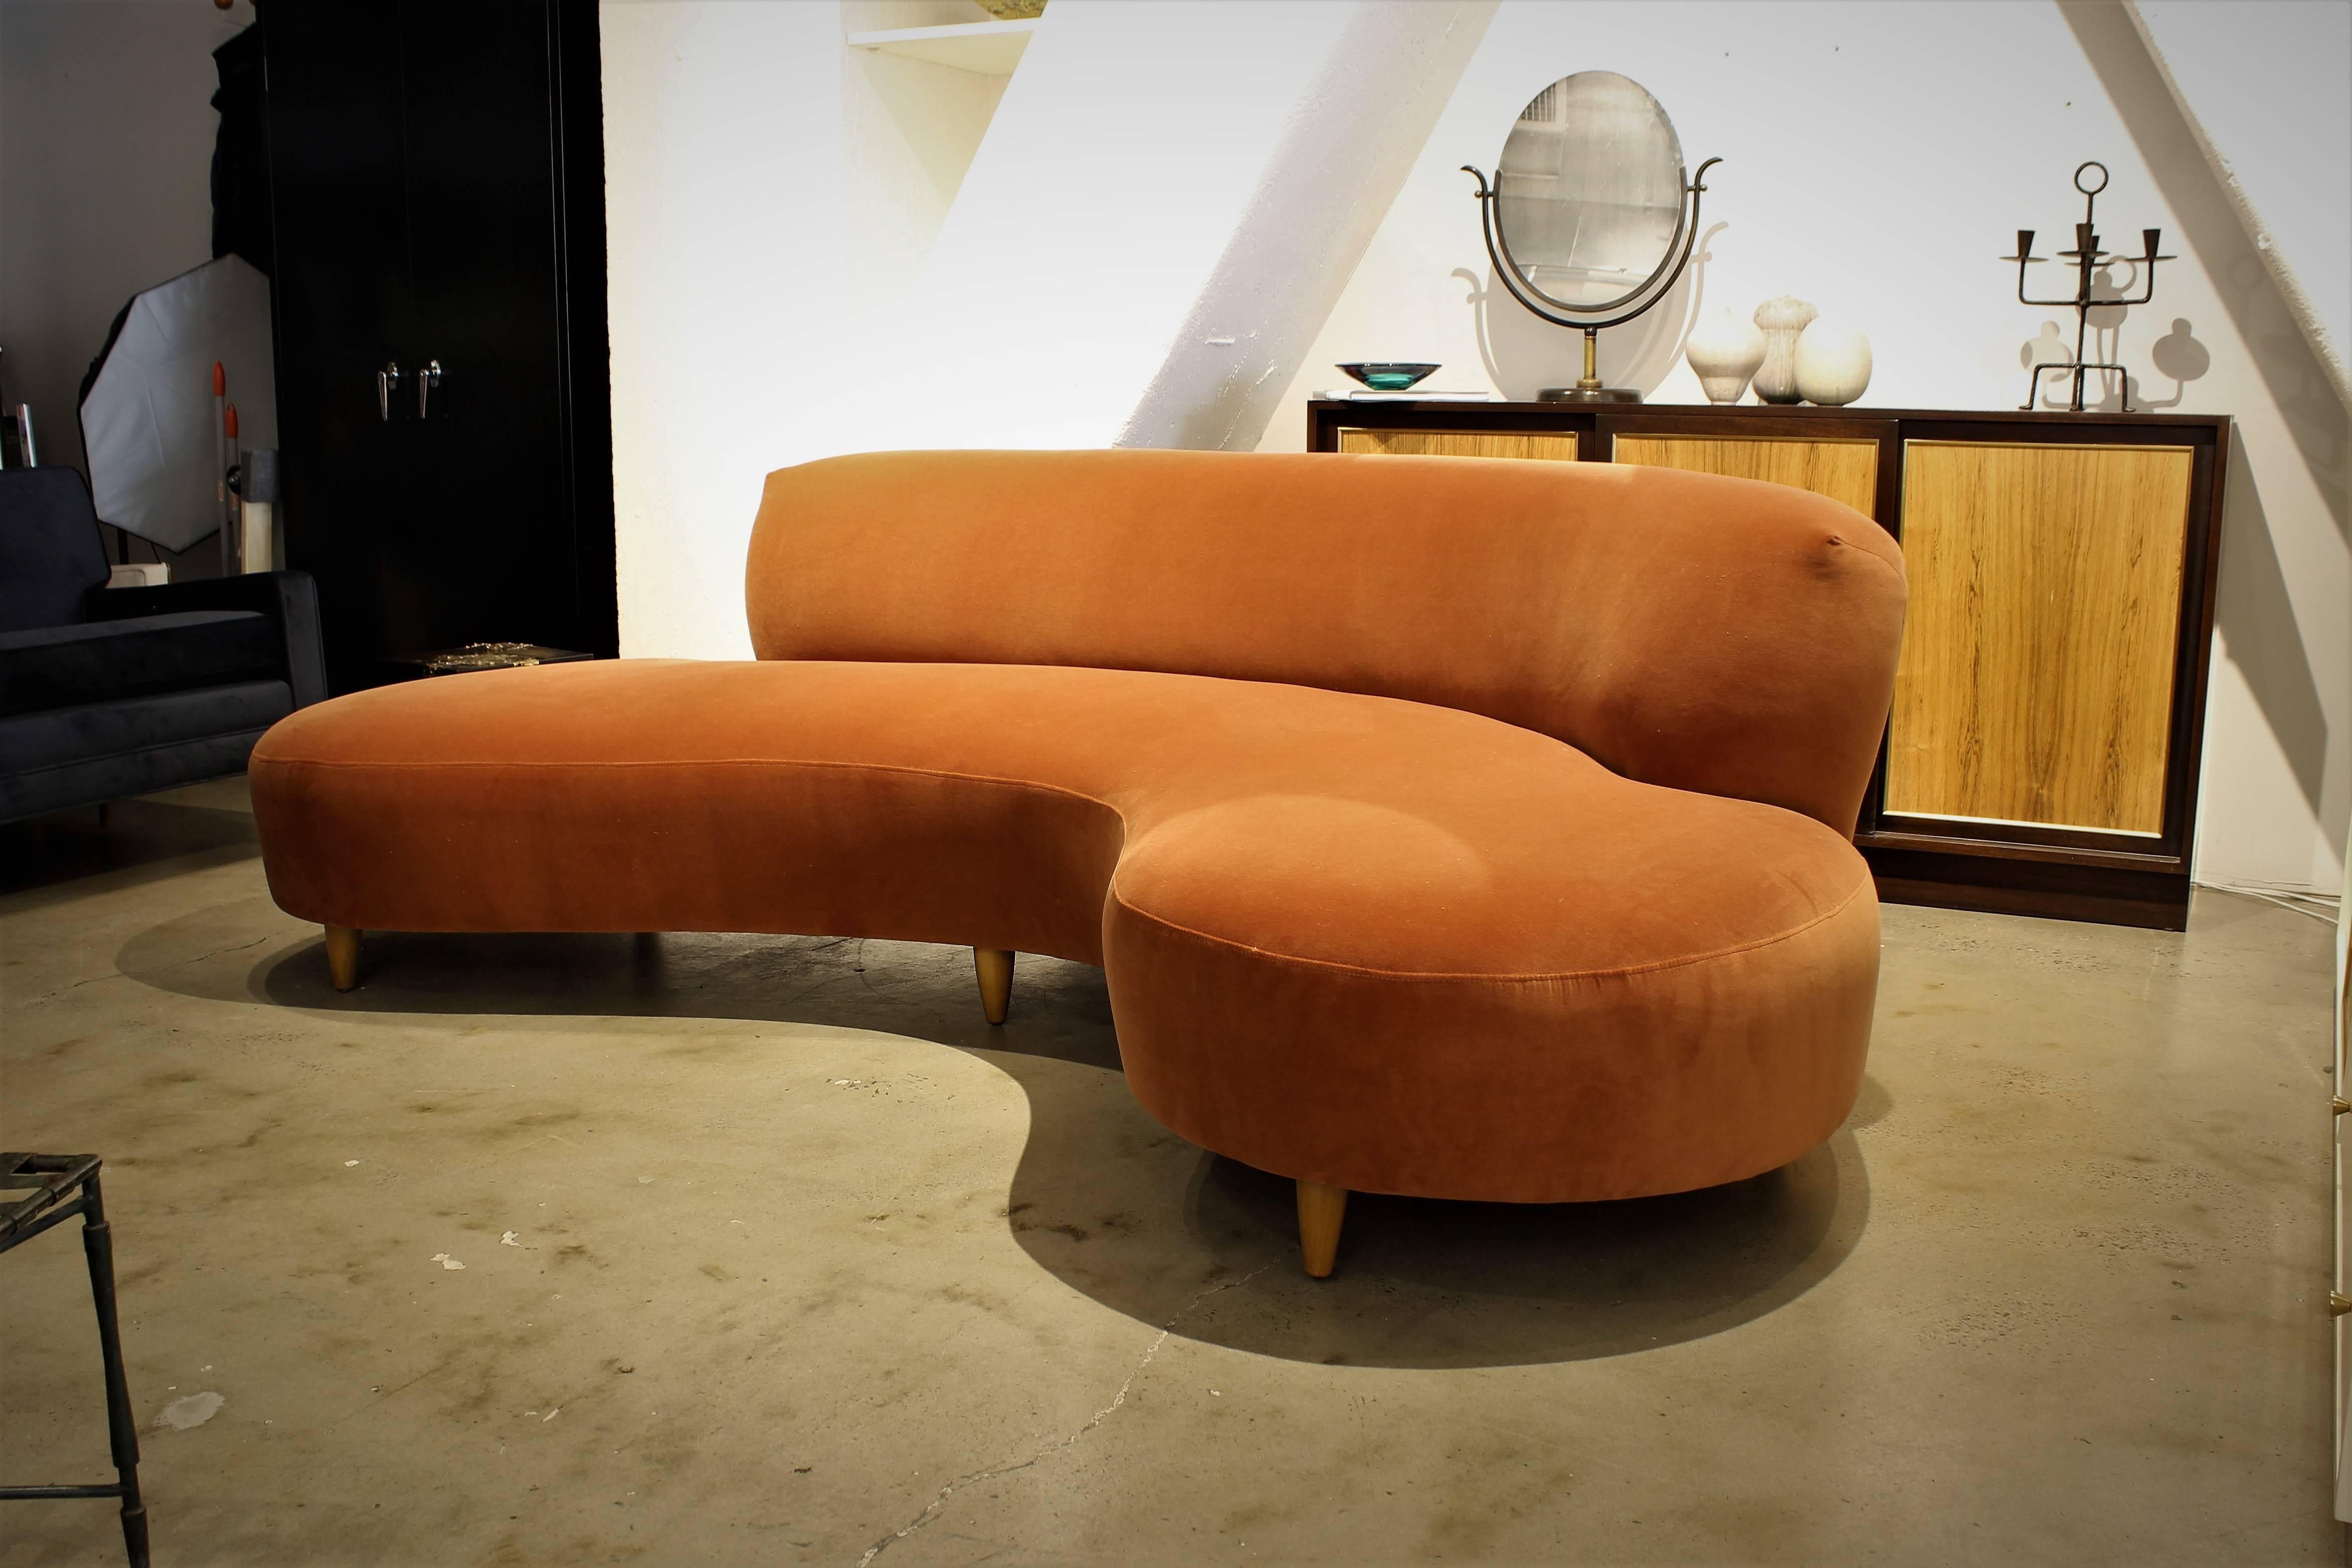 Stunning and sculptural sofa by Vladimir Kagan. This is an early version of this design. Often called the cloud, serpentine, or kidney sofa. This piece has become an icon of modern furniture. Newly upholstered in an apricot velvet. The tapered legs